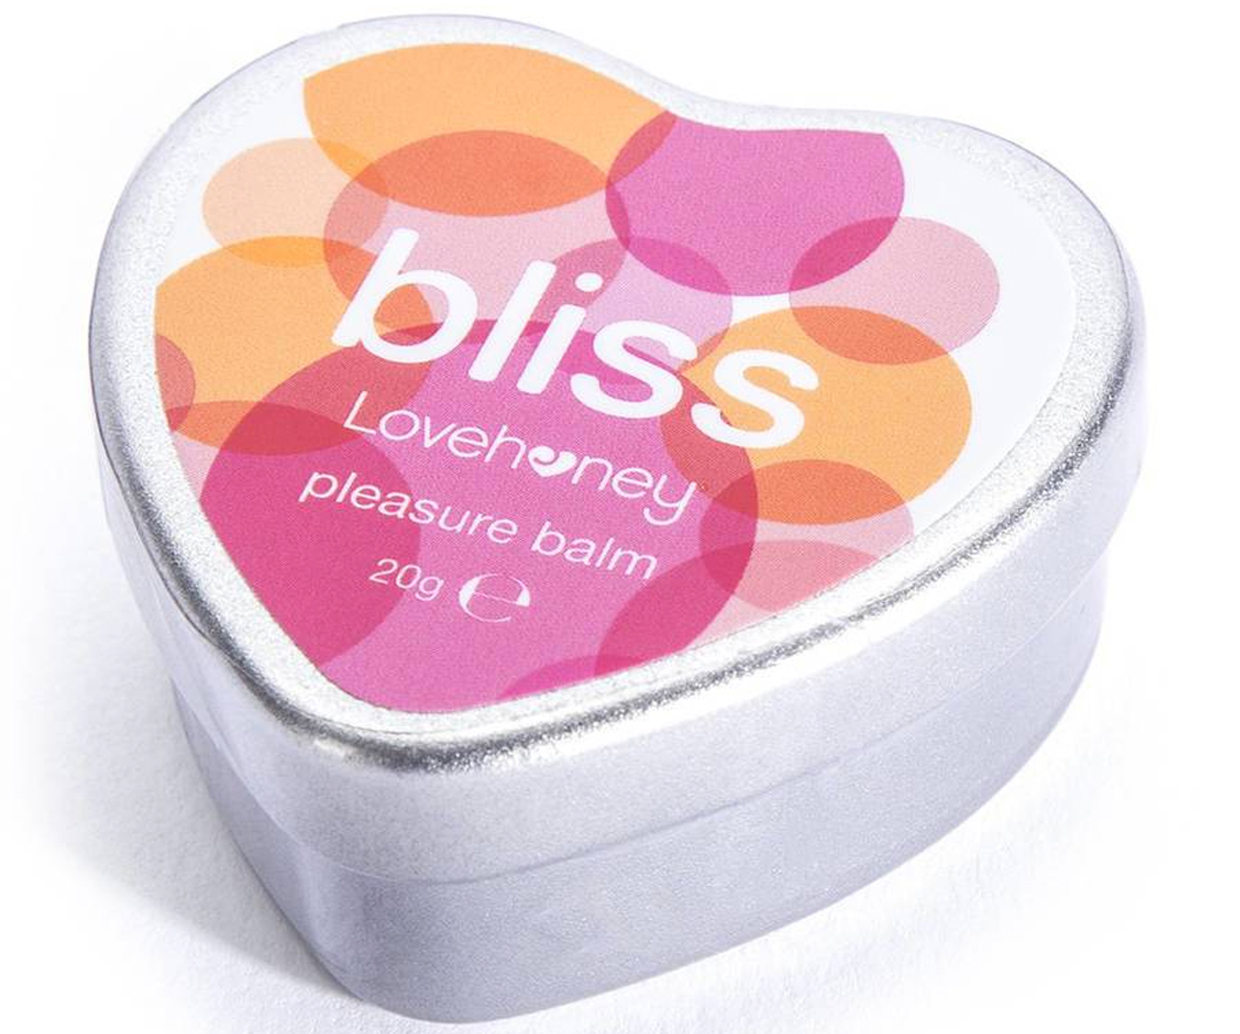 onyx and rose bliss balm